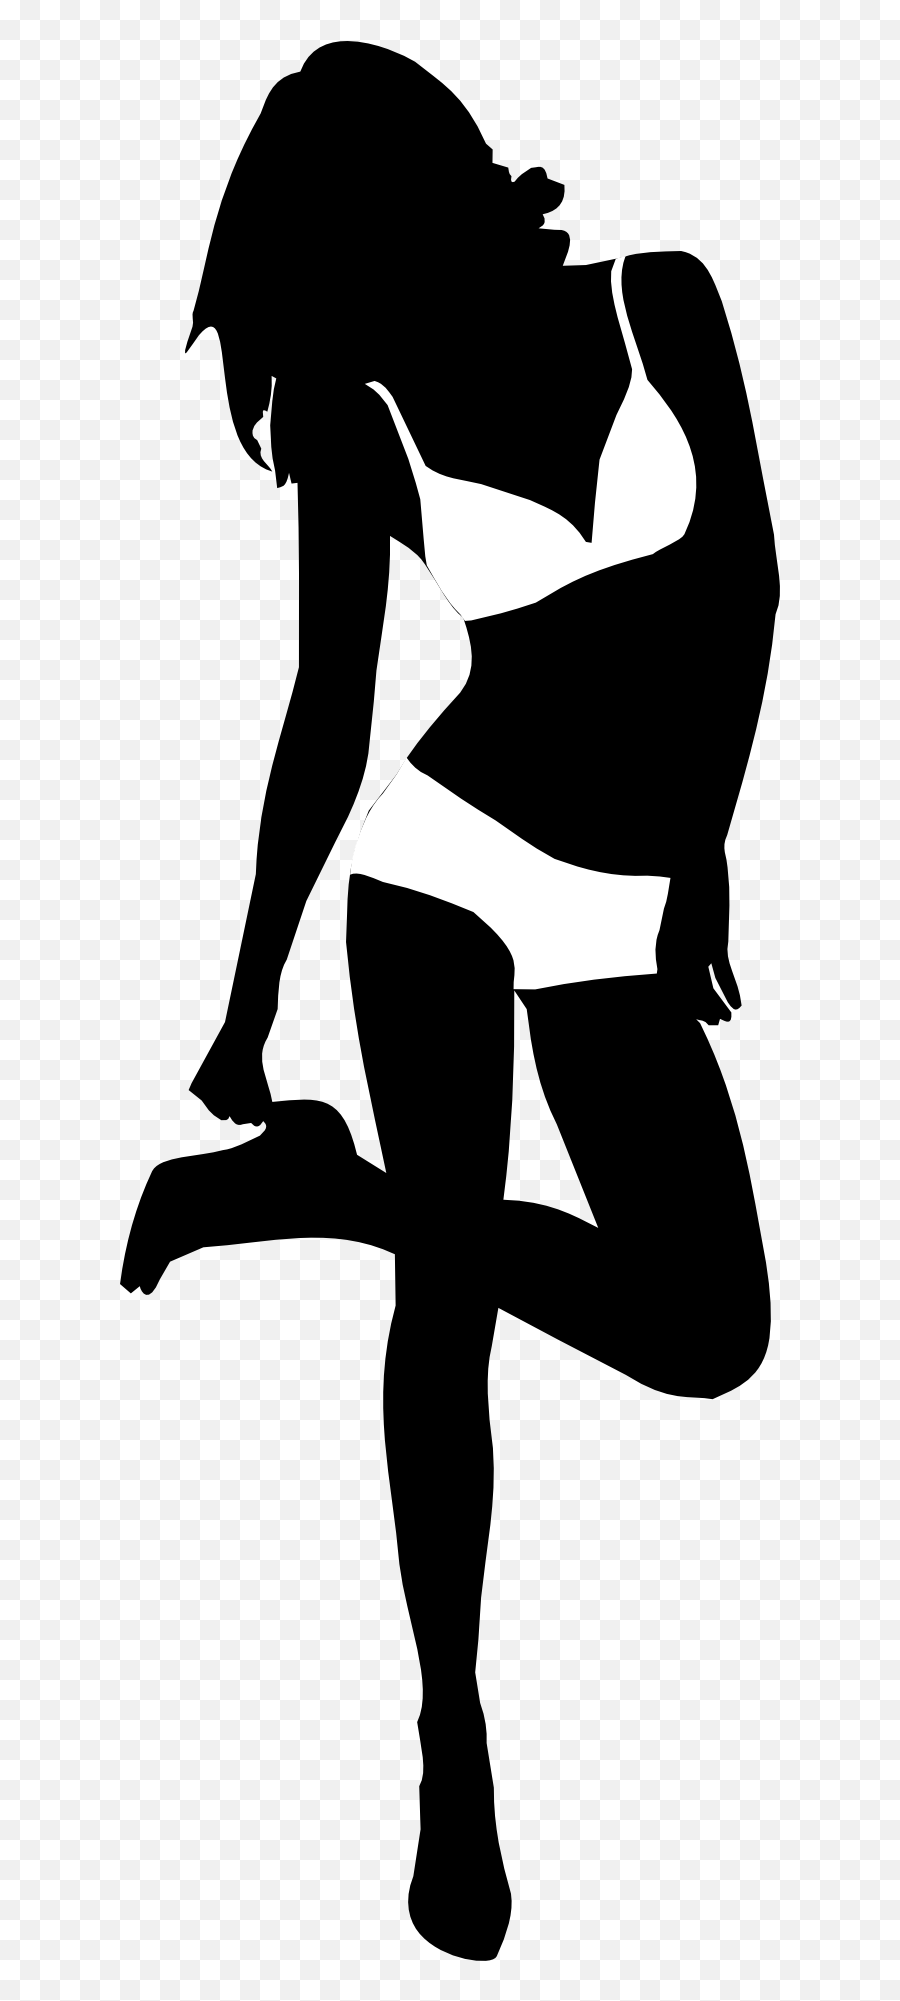 Silhouette Of The Woman In A Bikini Clipart Free Image Download Emoji,Swimsuit Clipart Black And White